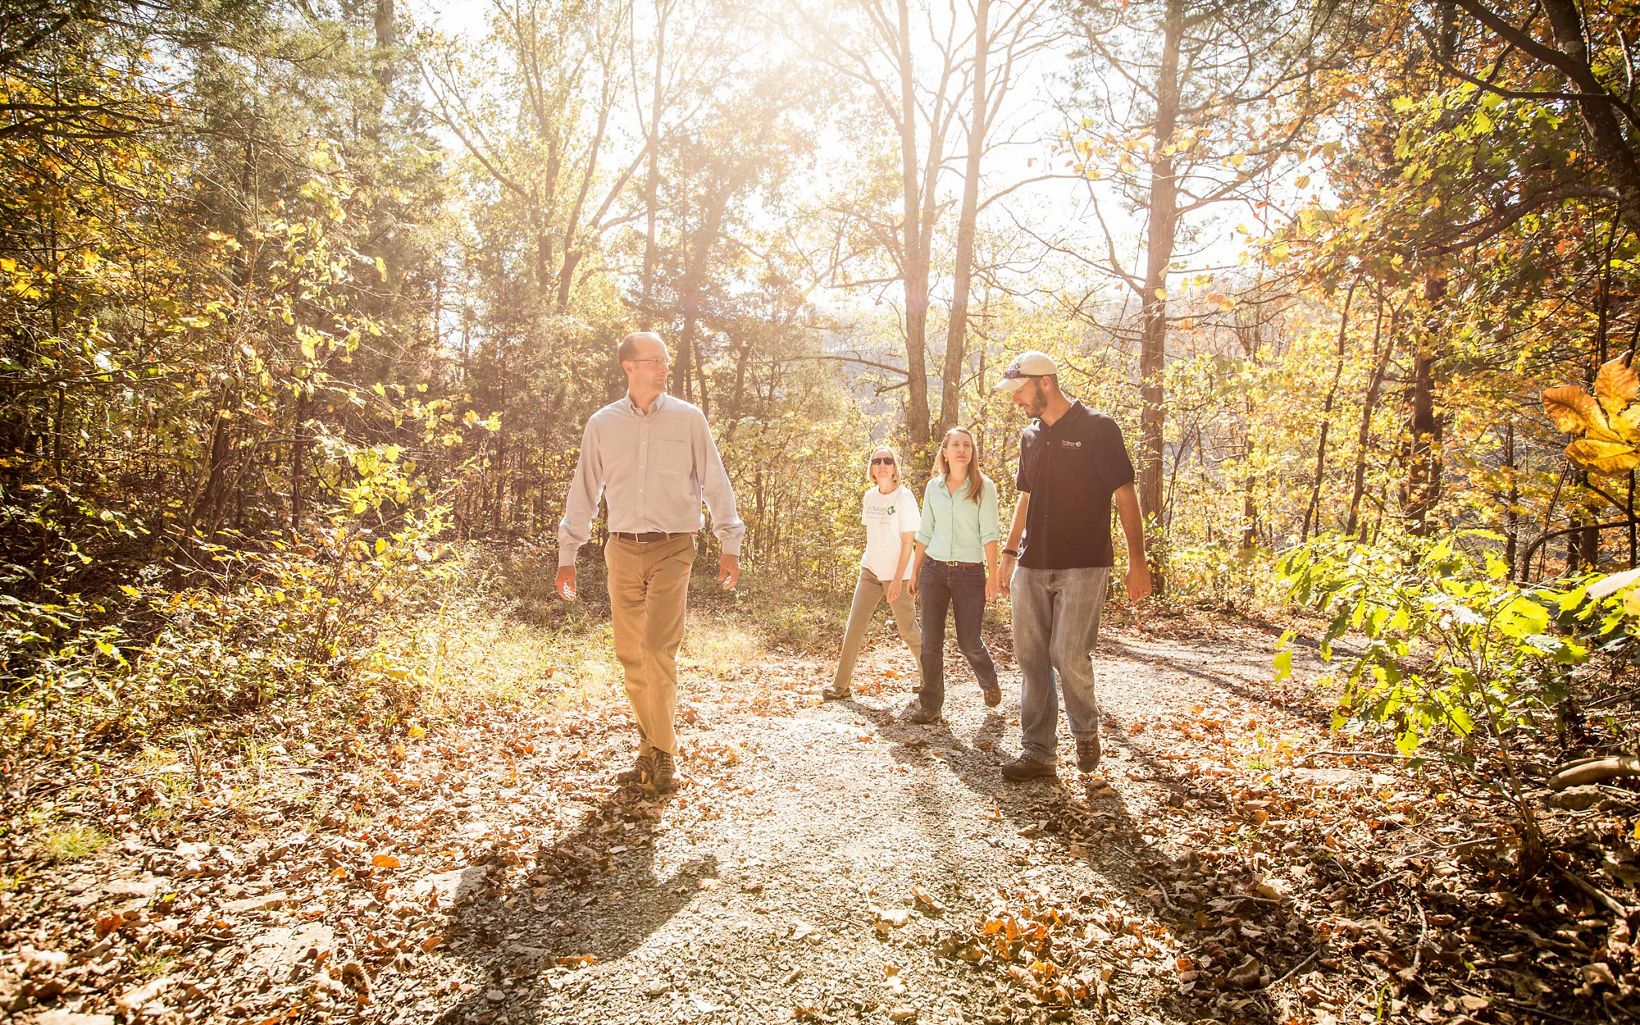 Dupree Nature Preserve Members of TNC's Kentucky staff take a walk at the Dupree Nature Preserve during autumn.  © Devan King/TNC